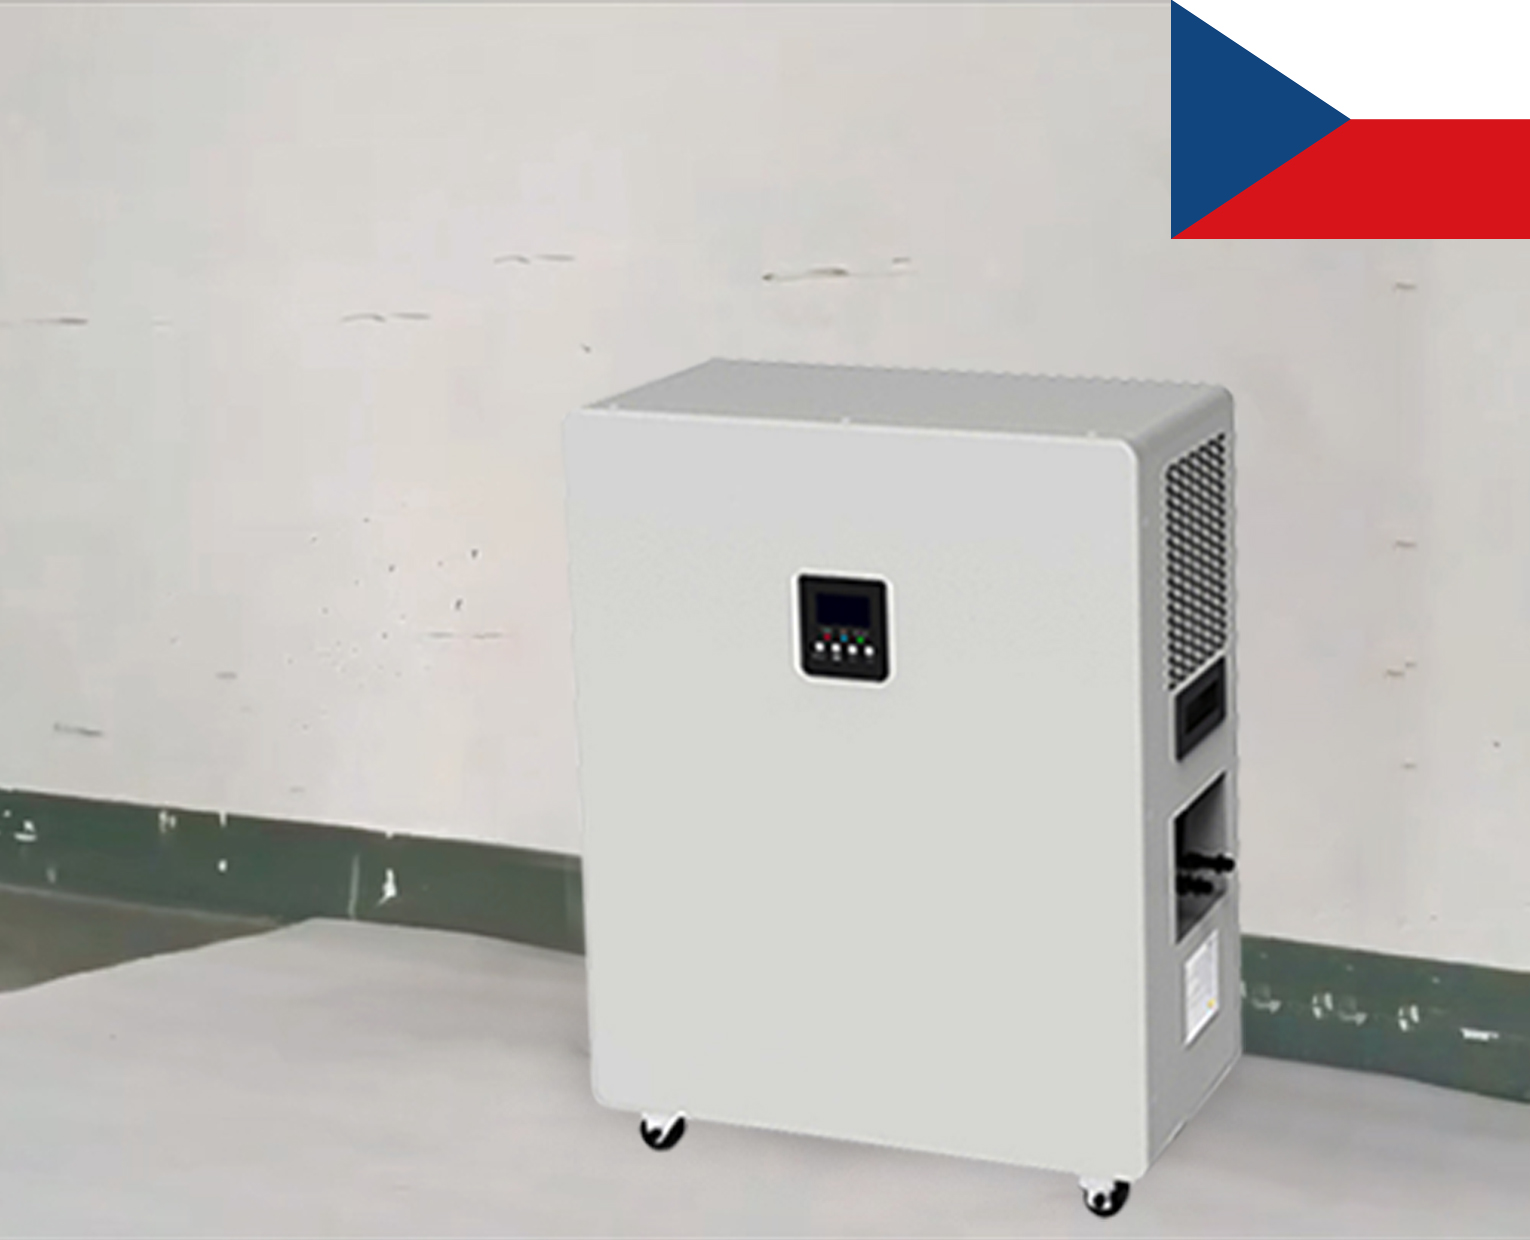 3kW All-in-One Residential ESS Shipped to Czech Republic